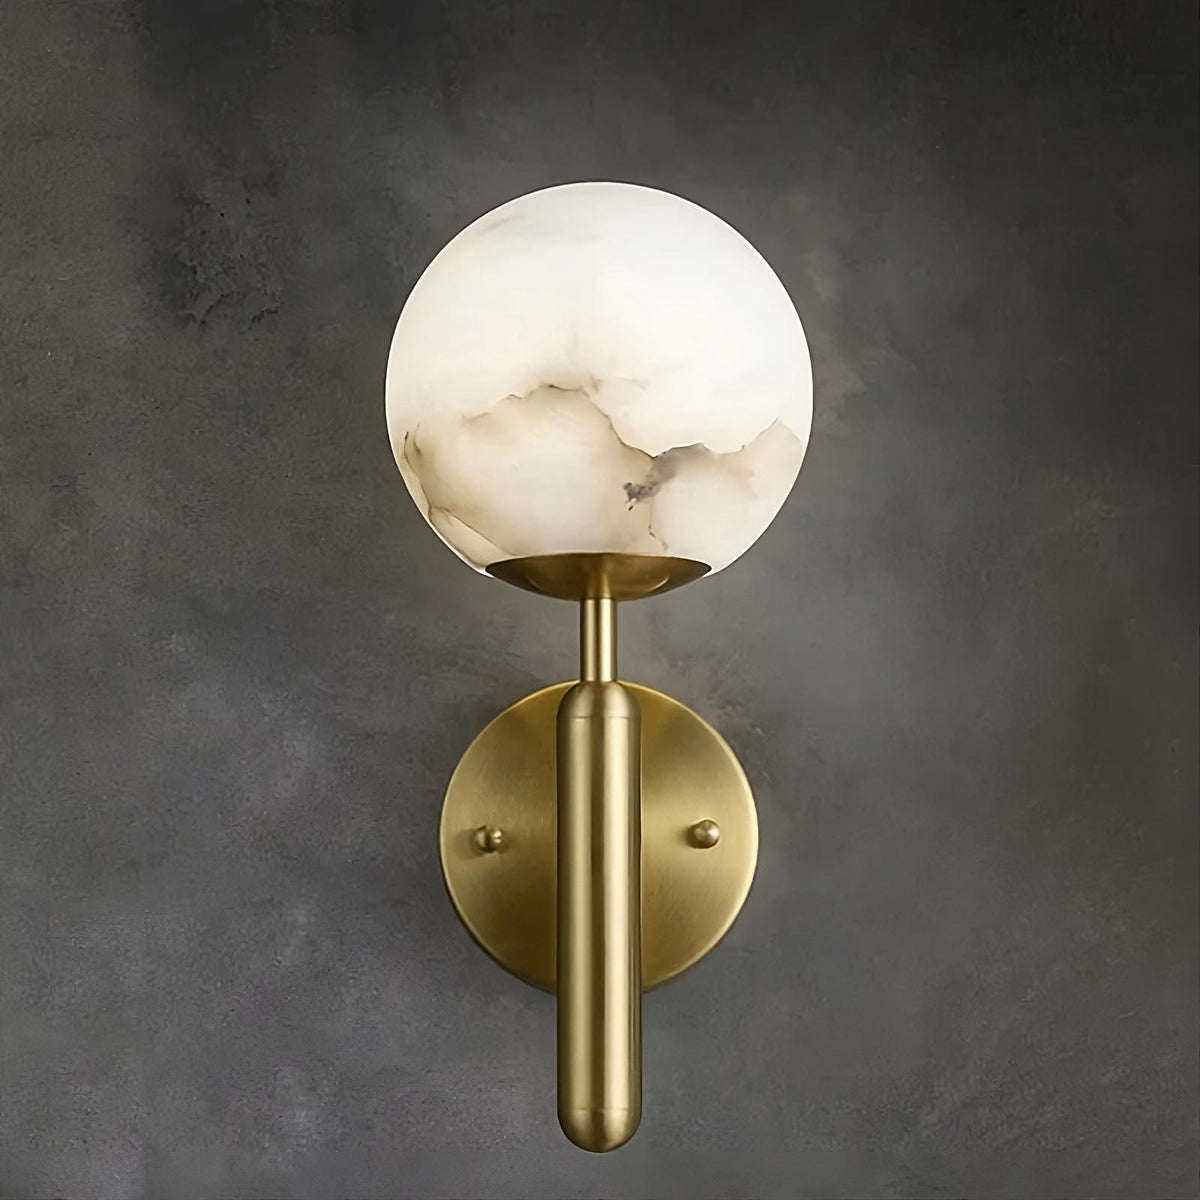 A wall-mounted brass light source featuring a cylindrical base and a spherical, translucent white glass shade with marble-like veining. The background is a smooth, dark gray surface, highlighting the warm, elegant design of the dimmable Natural Marble Sphere Wall Sconce by Morsale.com.